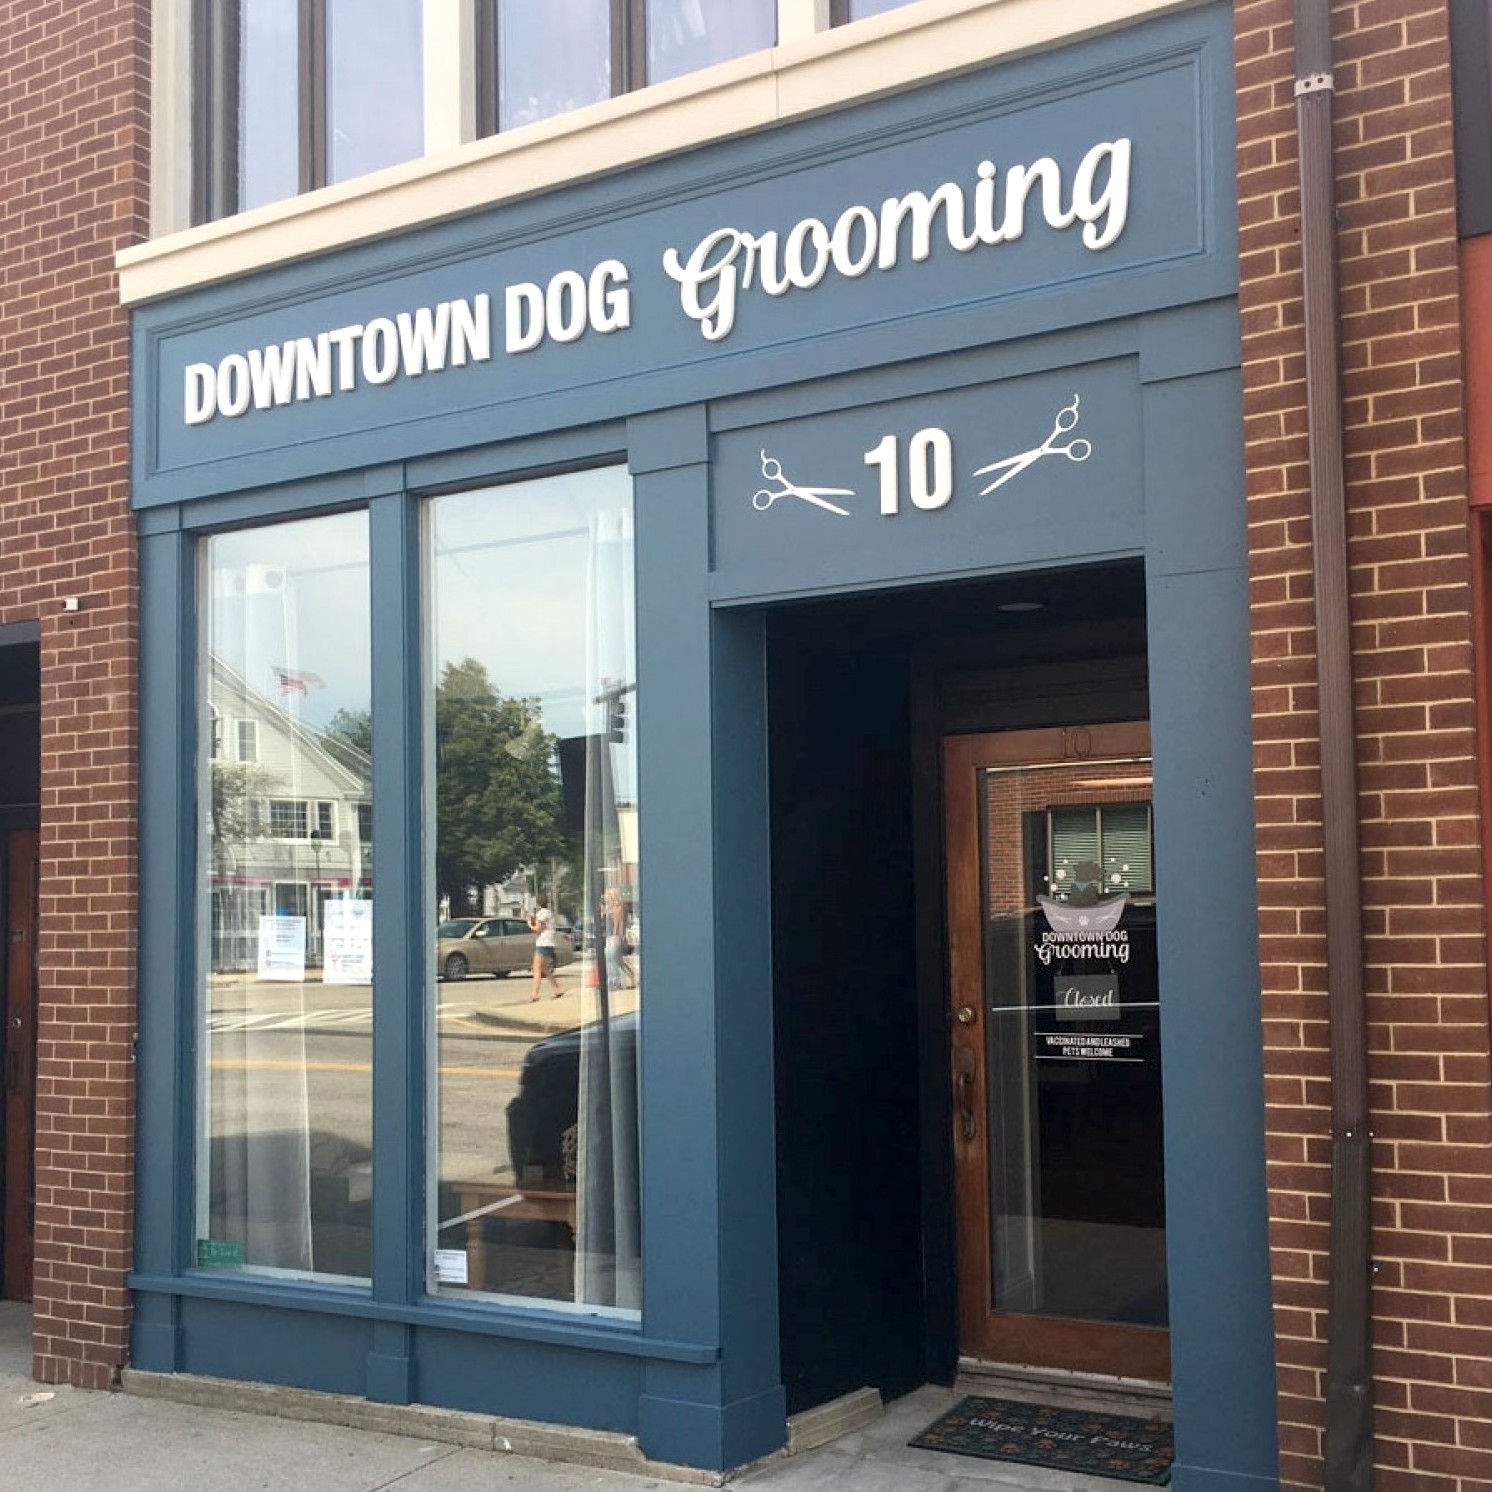 Dog getting groomed at Downtown Dog Grooming